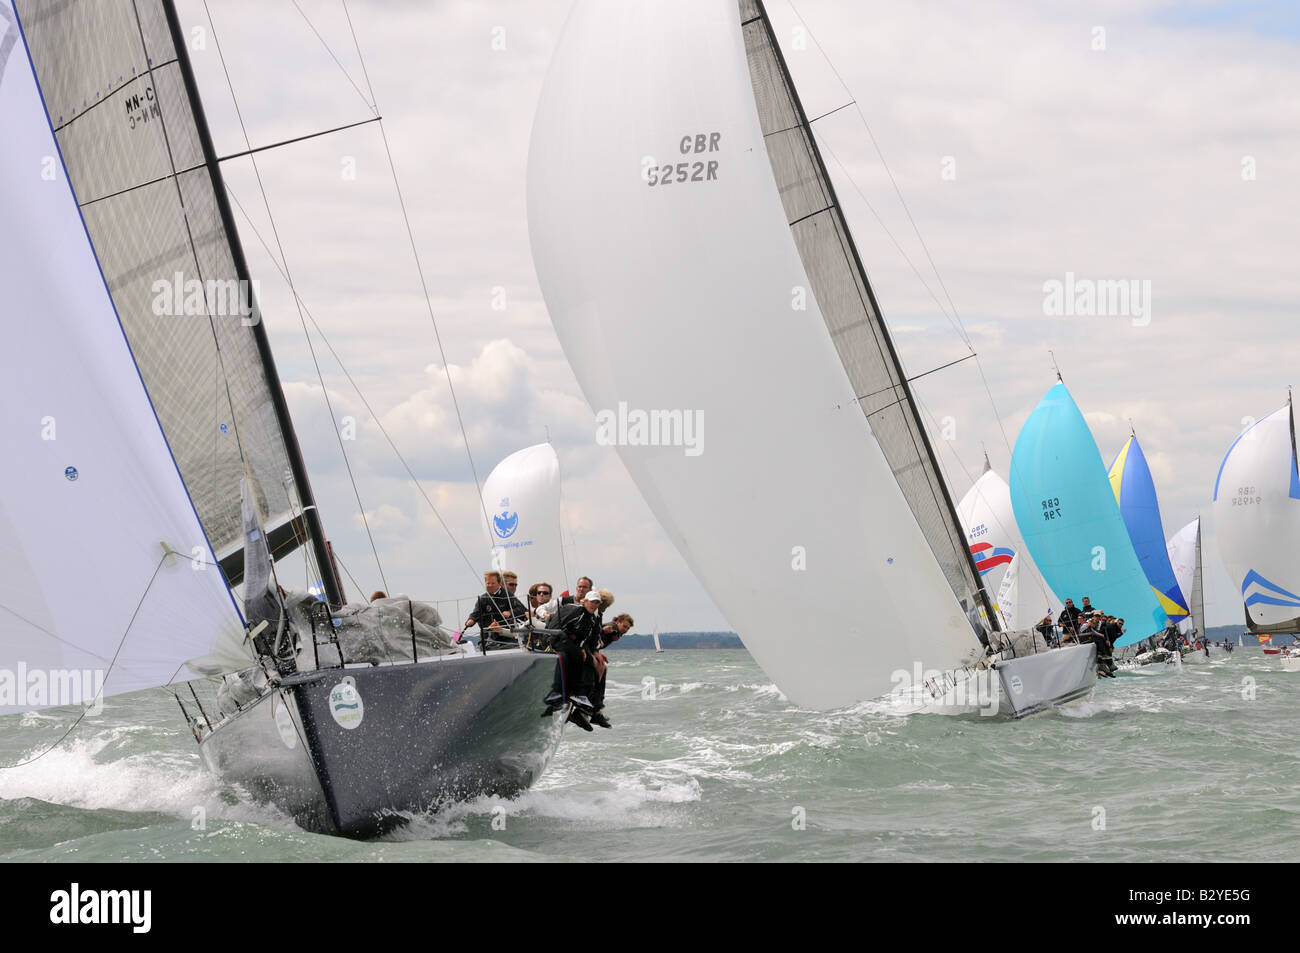 Bow of racing yacht TP52 design cutting through the waves sailing Cowes Week Isle of Wight Stock Photo